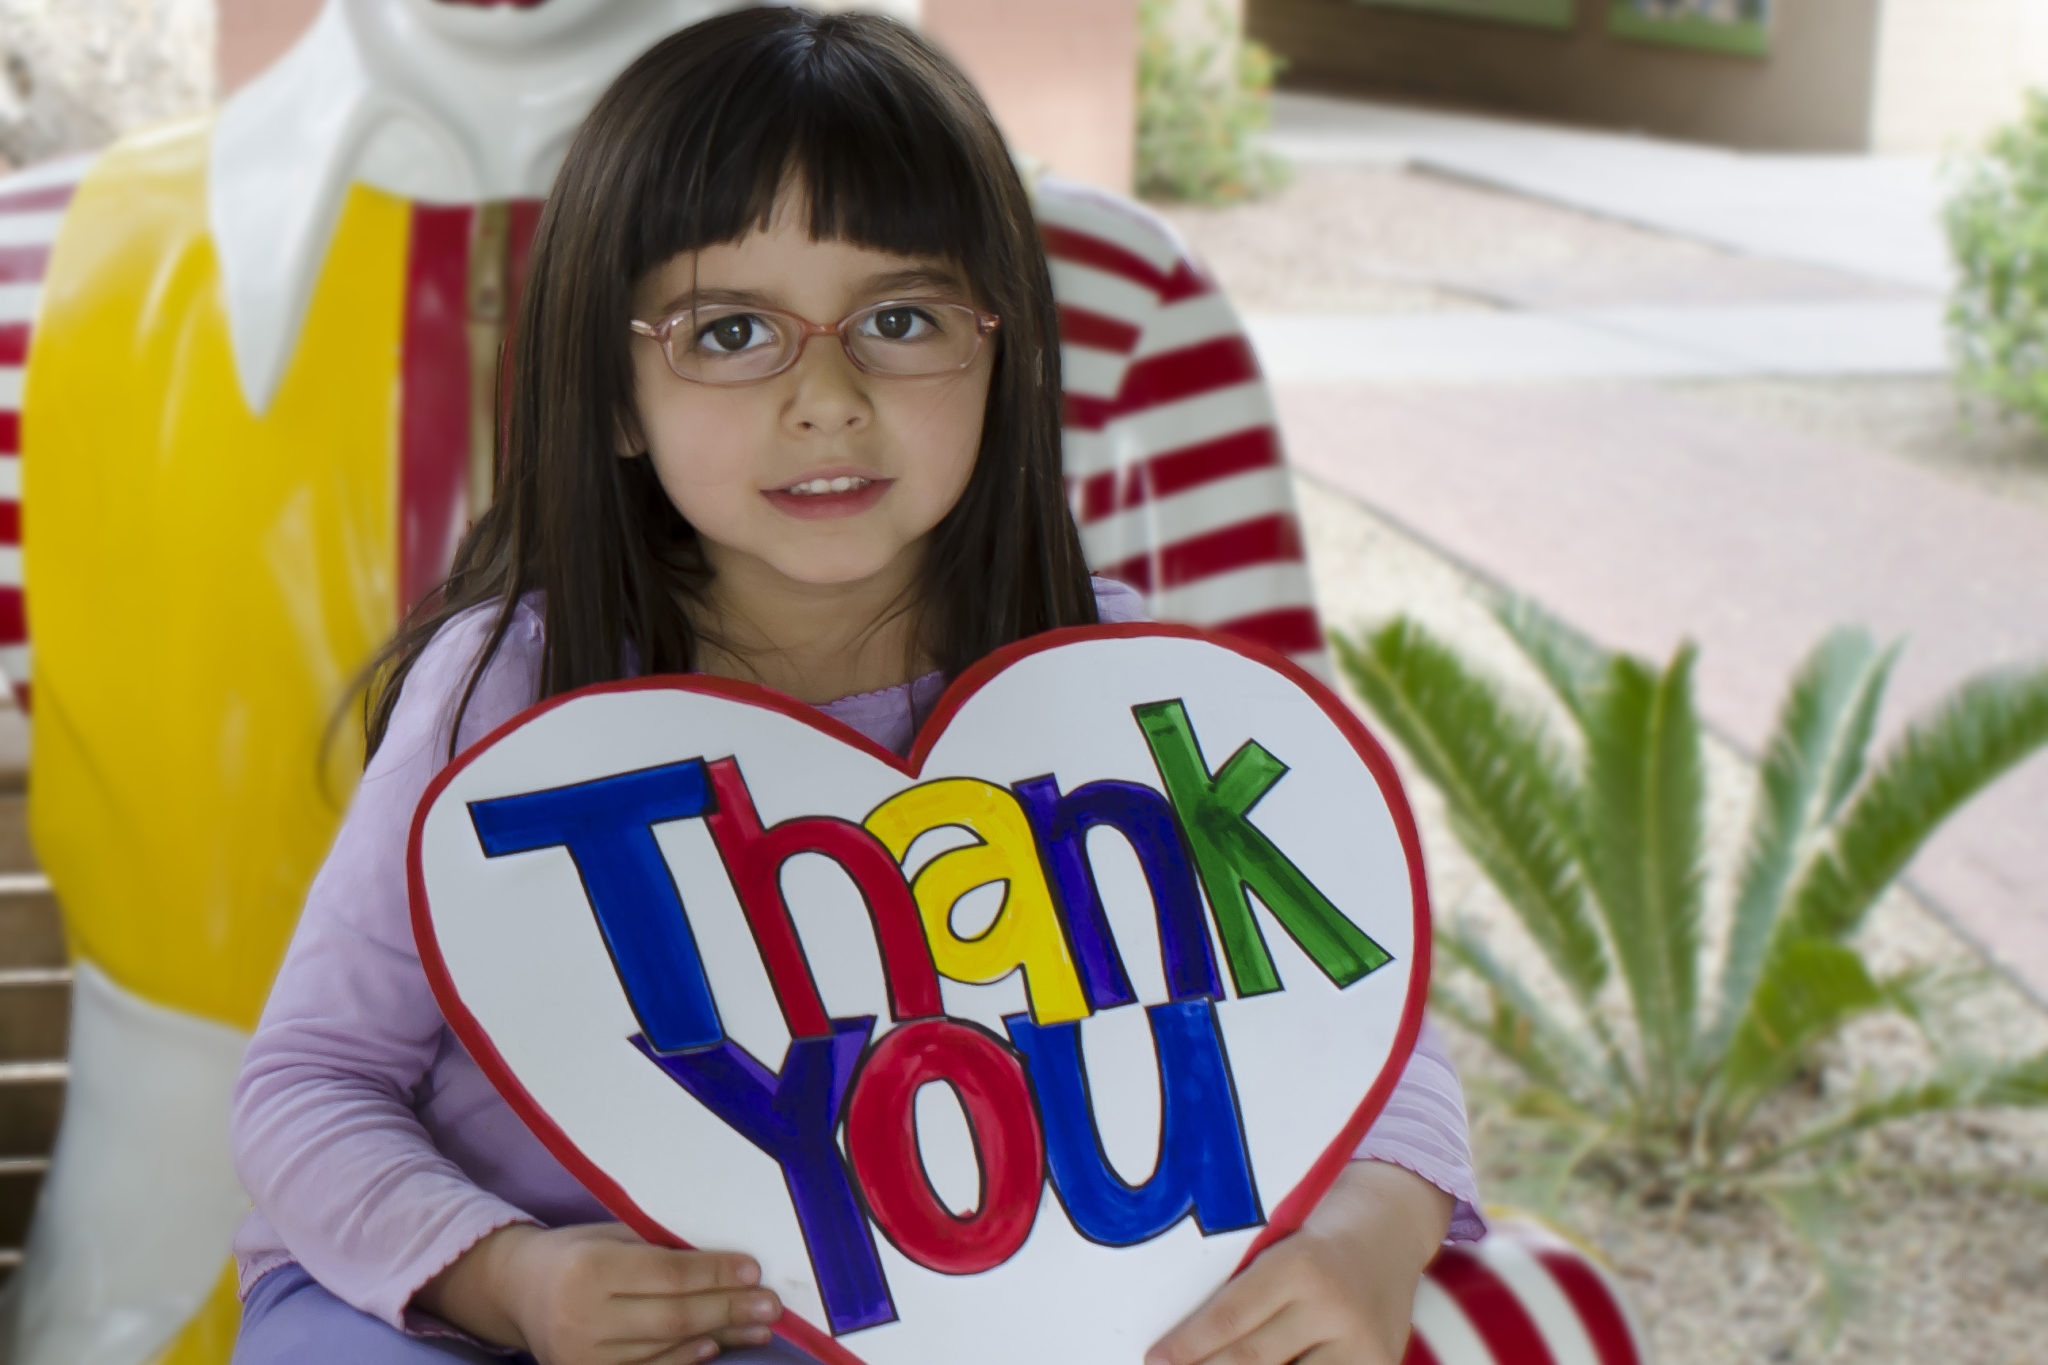 Little girl sitting on the Ronald McDonald bench holding a sign that says "thank you"